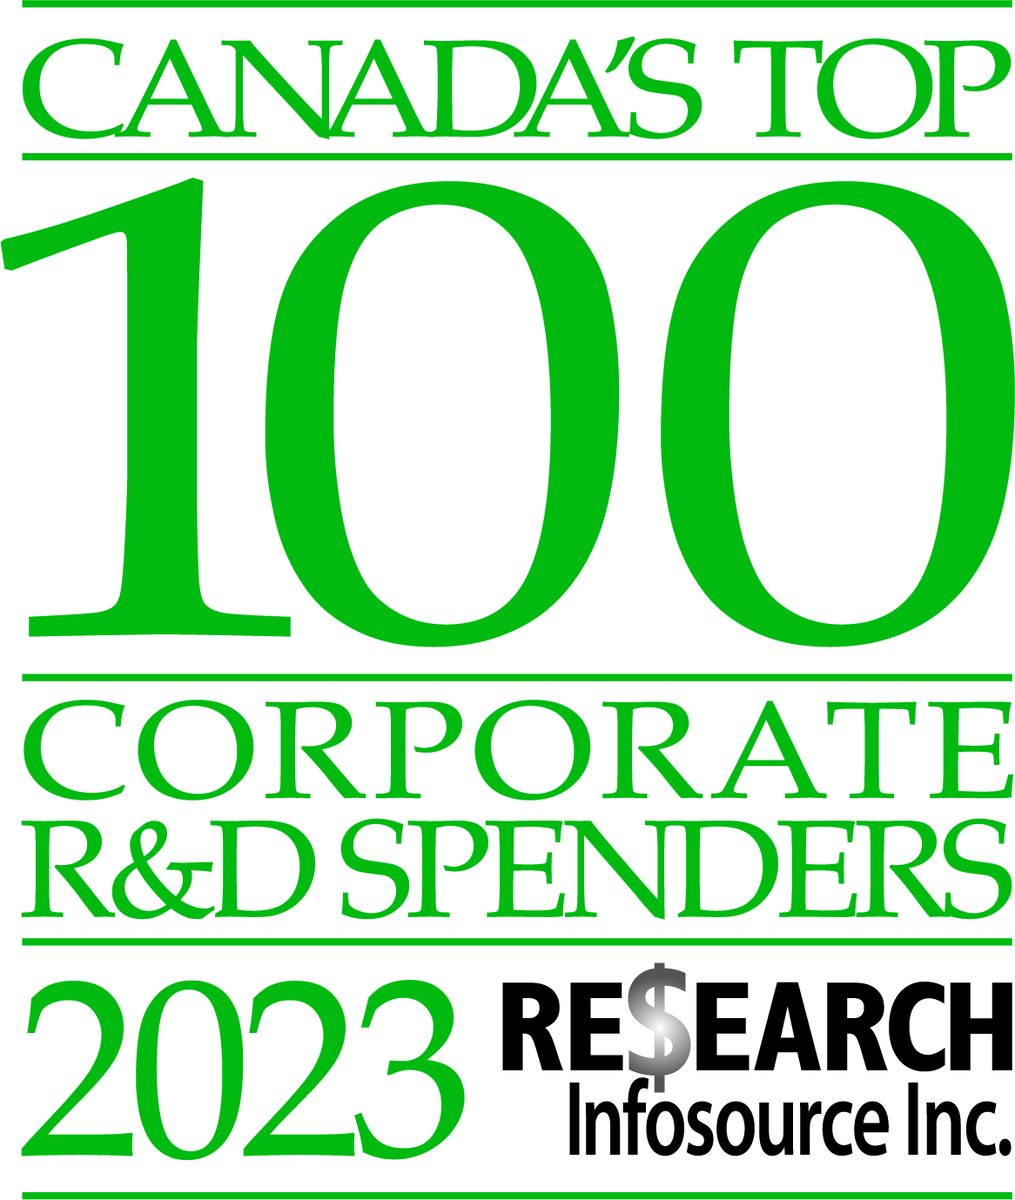 We are proud to once again be Canada’s Top 100 Corporate R&D Spenders!

Sanofi Canada remains an industry leader with the investment of 20% of our revenues in Canadian biopharma research every year.

#researchanddevelopment #research #cdnresearch #cdninnovation